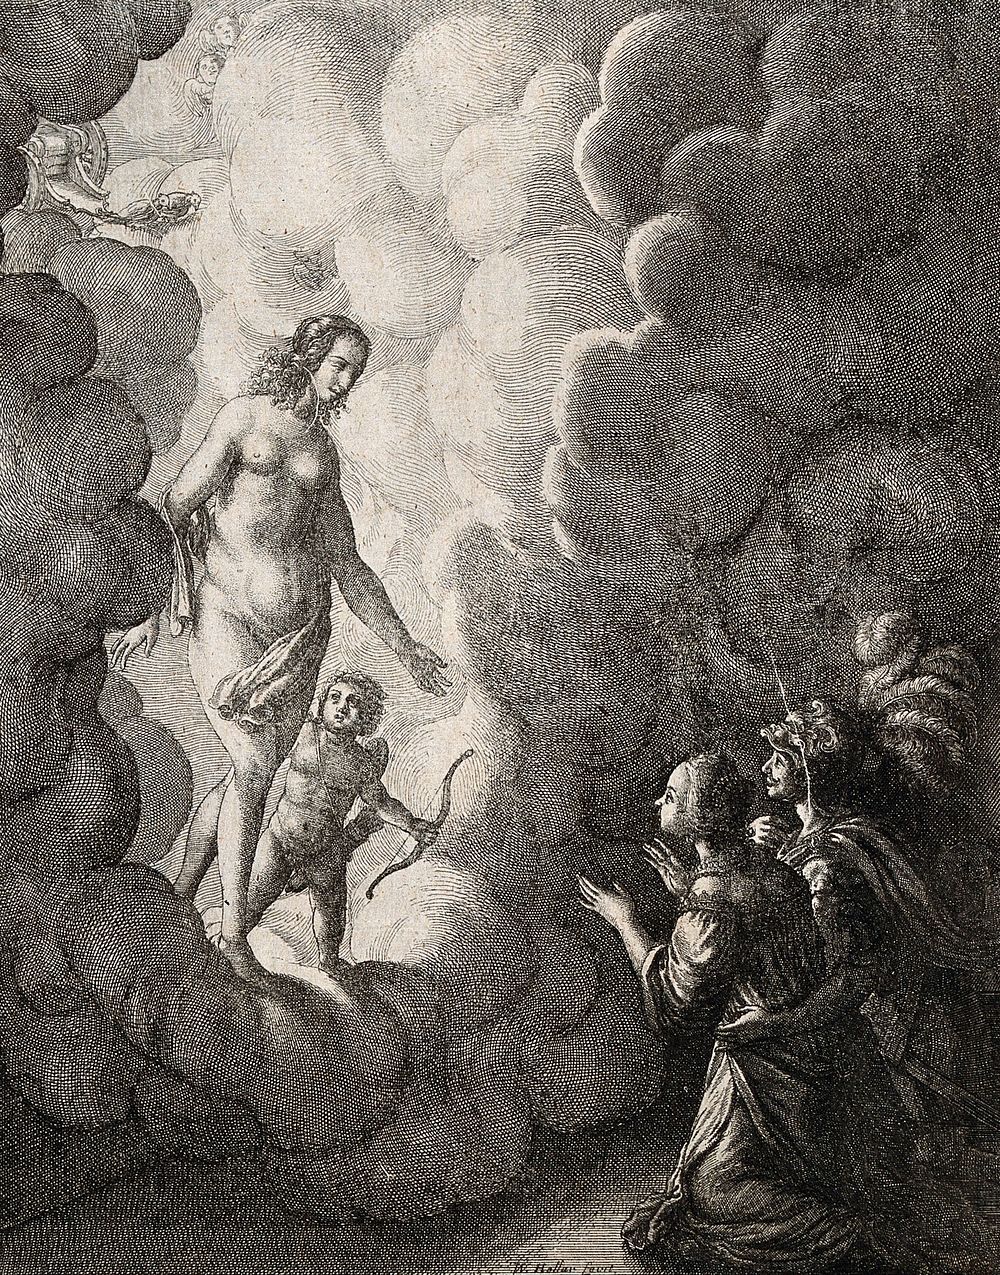 Venus and Cupid descend from the clouds towards a widow of Ephesus and a soldier who is in love with her. Etching by W.…